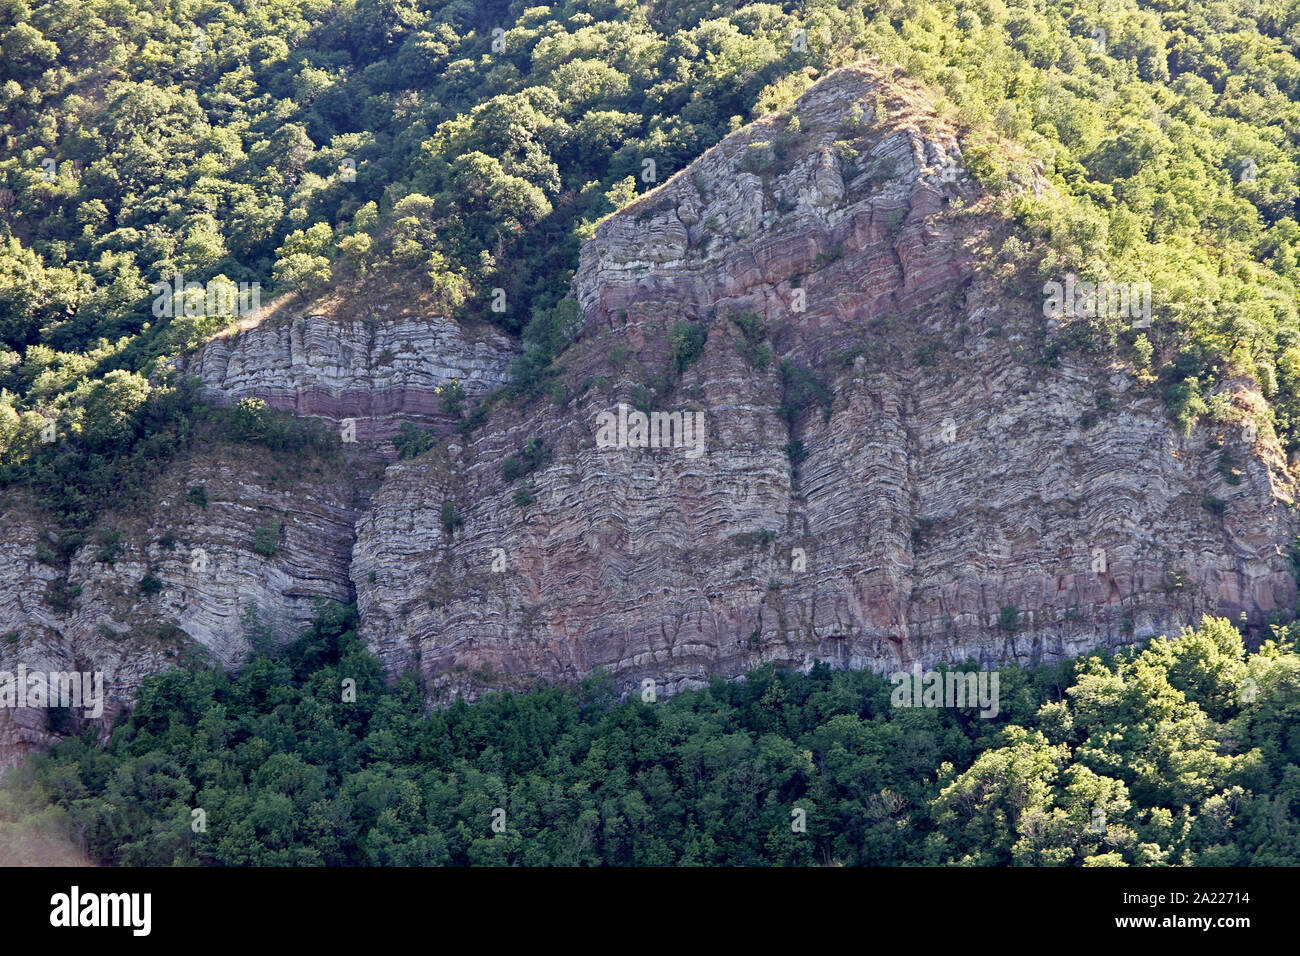 View of rocky cliff between Boljetin and Donji Milanovac from the Danube River, border between Romania and Serbia, Boljetin / Donji Milanovac, Serbia. Stock Photo